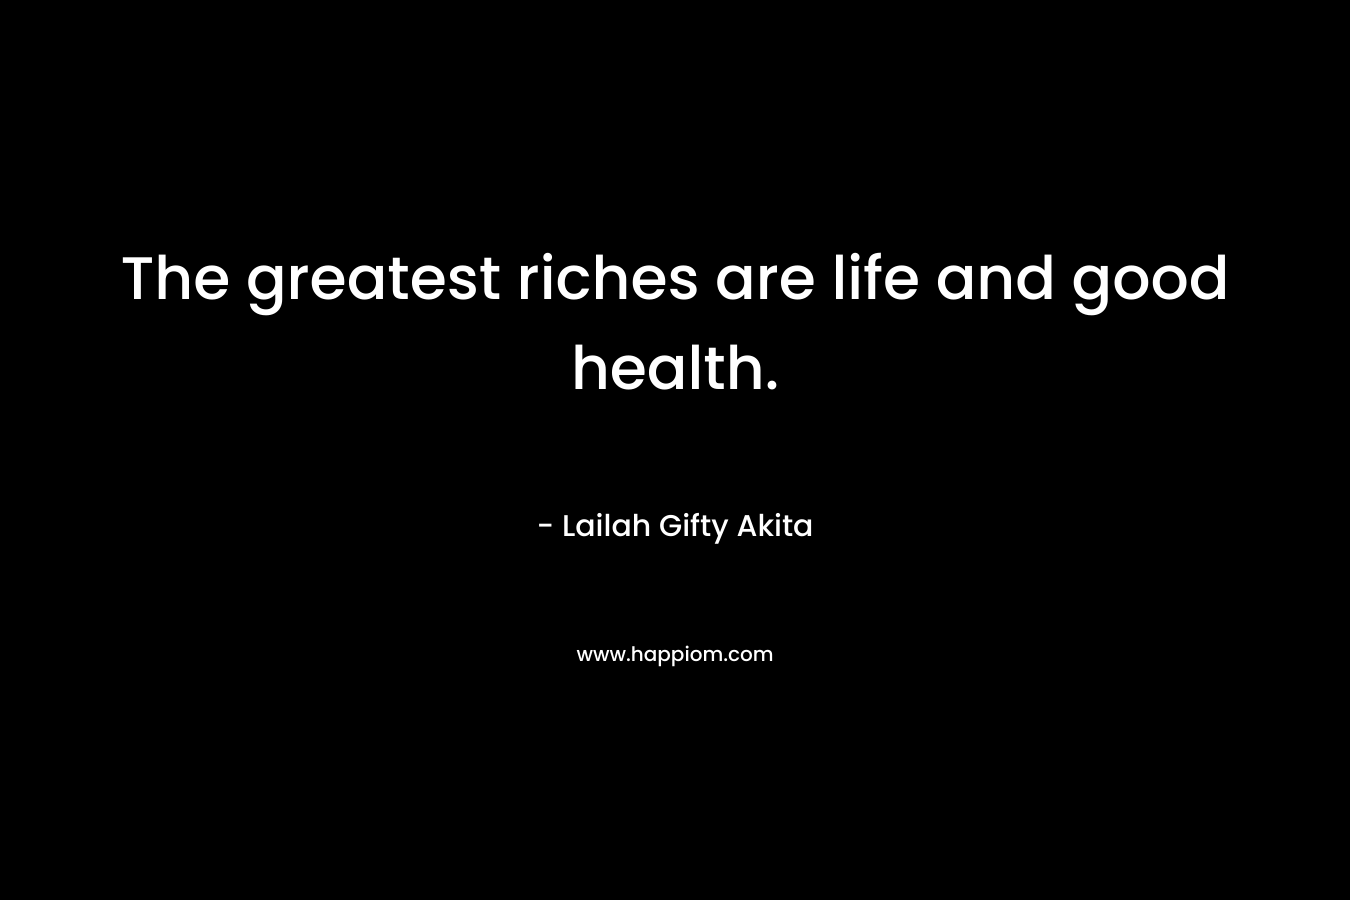 The greatest riches are life and good health.